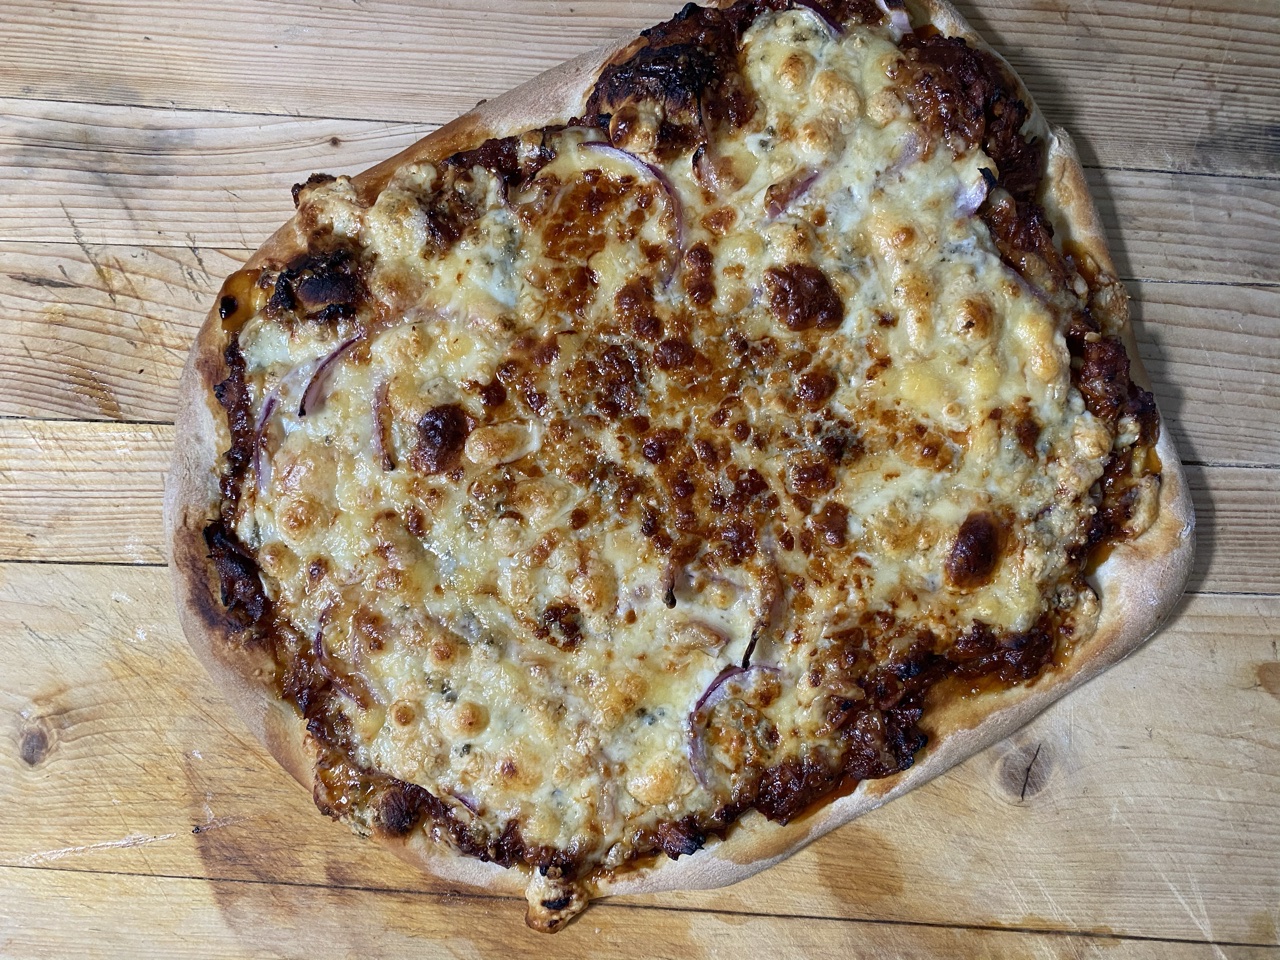 333CE165 7639 4E7D 8DB2 6A9AE3515C47 - BBQ Chicken Pizza with Red Onions, Gorgonzola, & Smoked Gouda